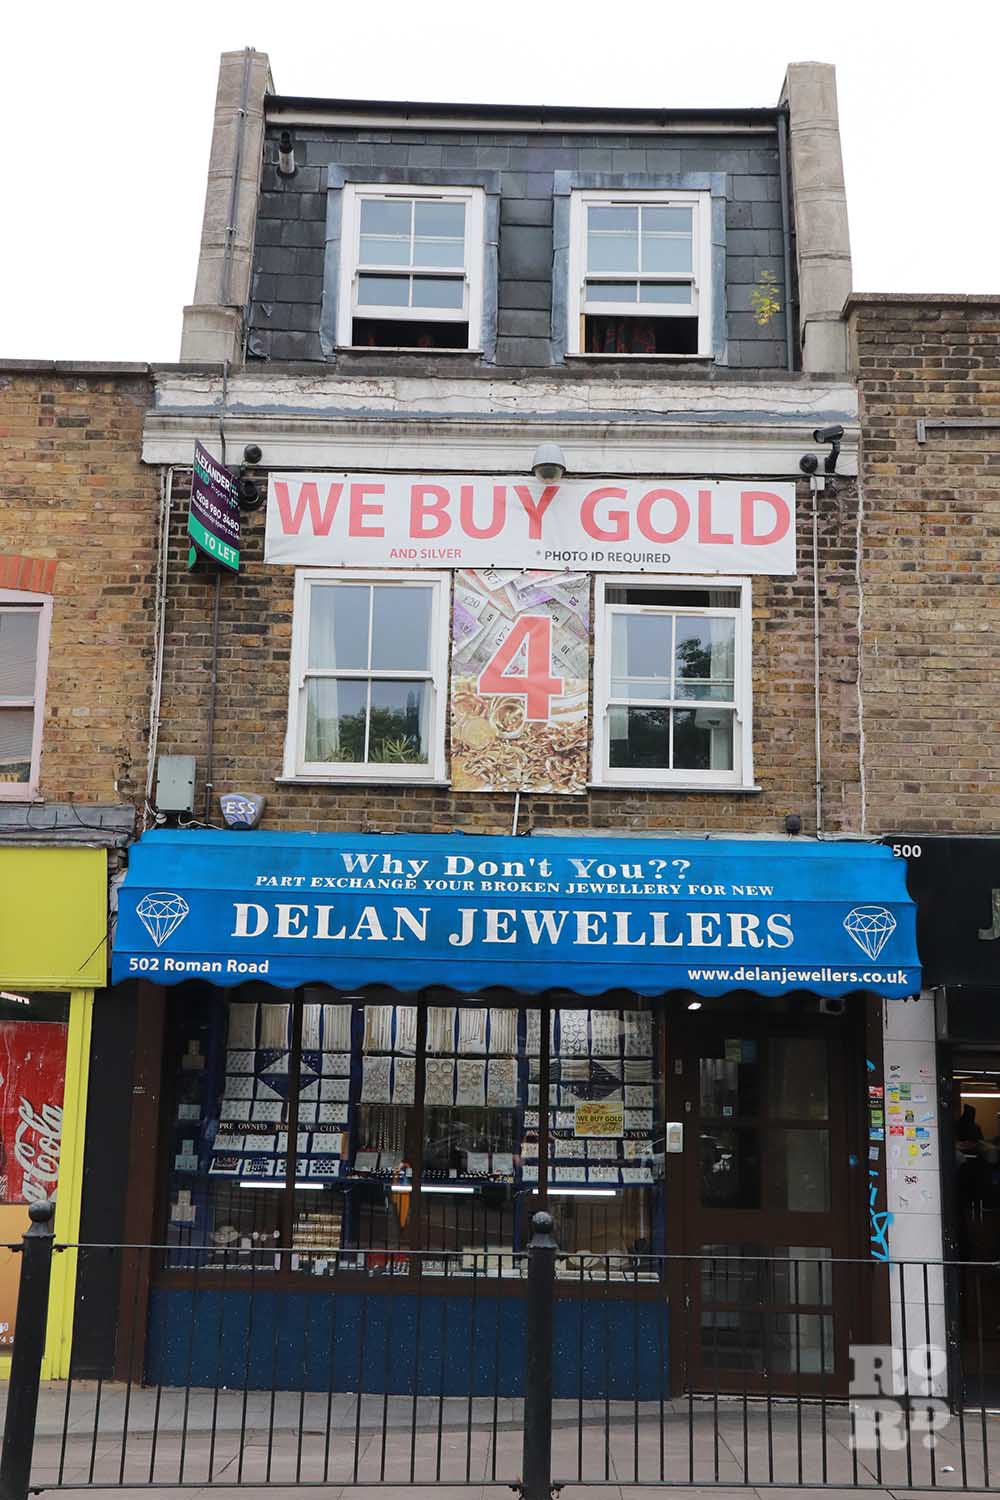 Shopfront of Delan Jewellers at 502 Roman Road in Bow, East London.